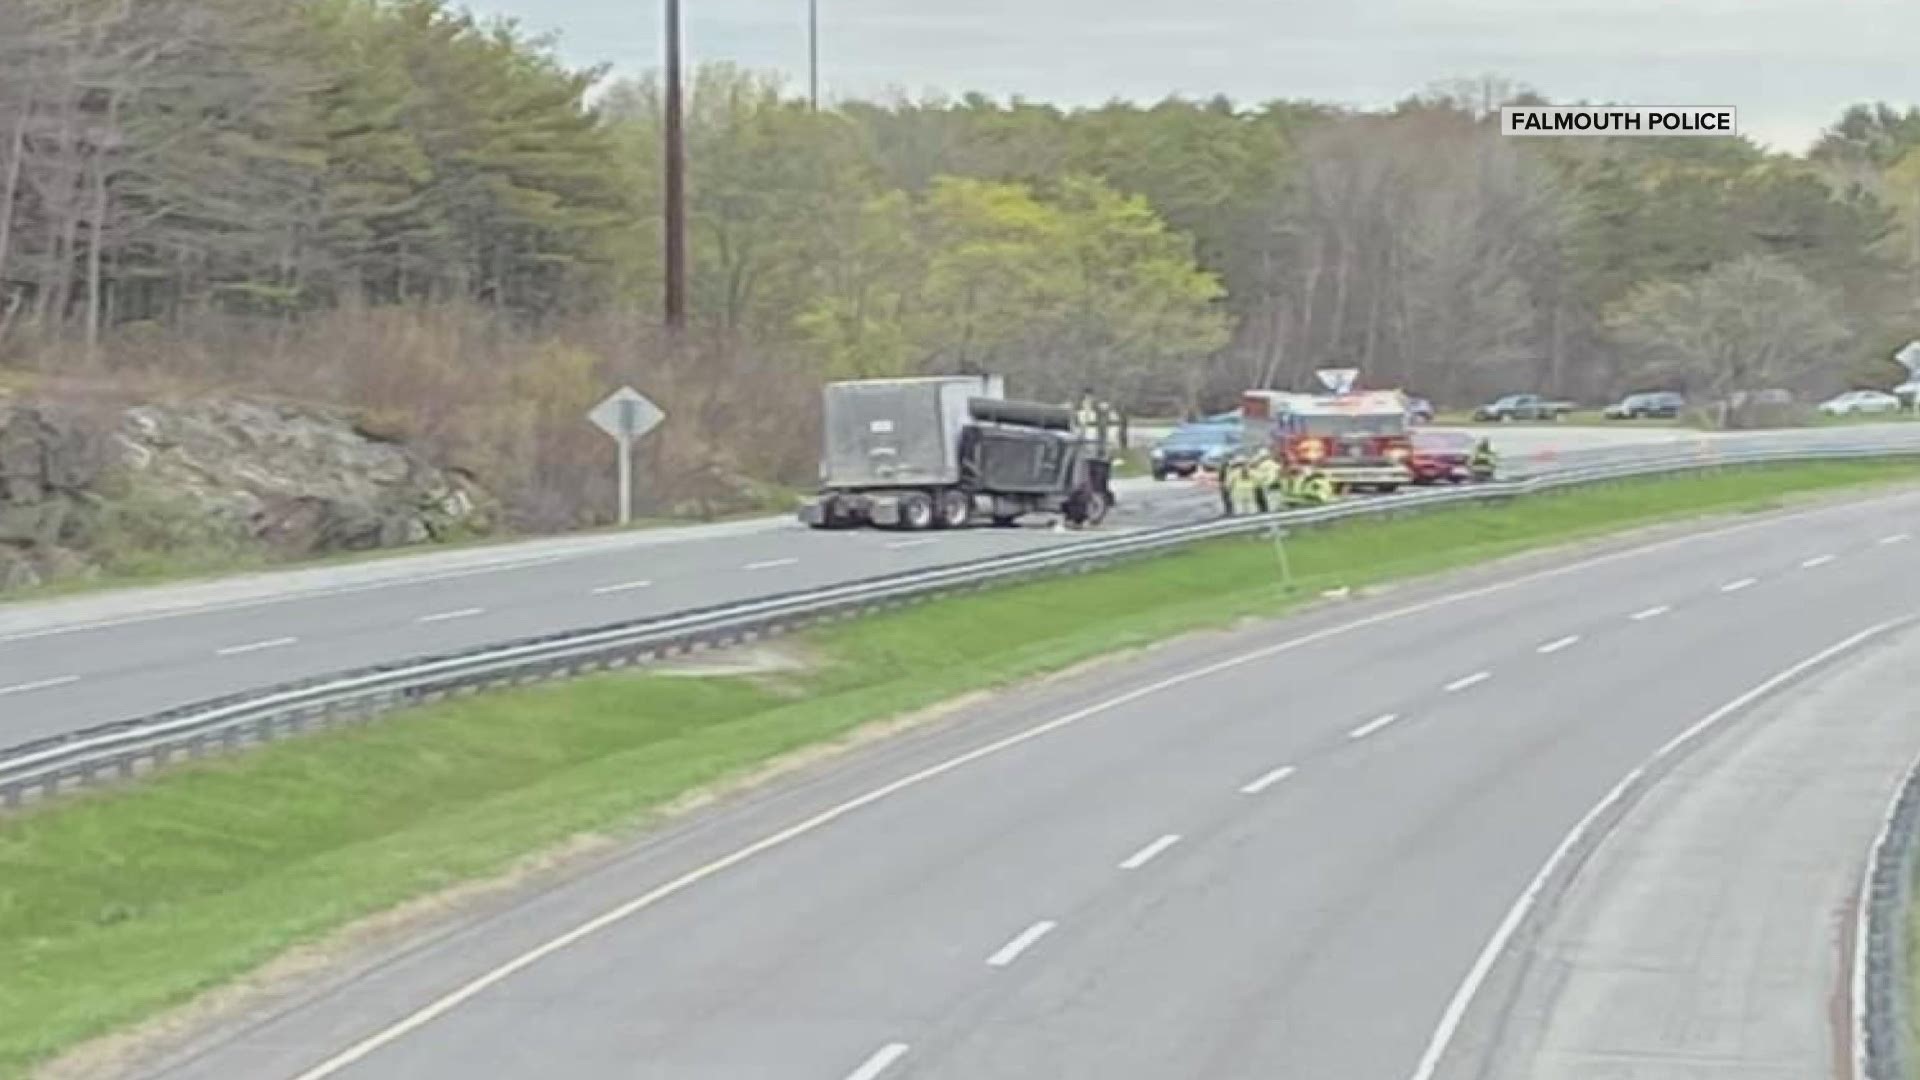 Falmouth public safety dispatch says it happened on the northbound side of 295 at mile 11.   Maine state police and the Falmouth fire department were on scene.